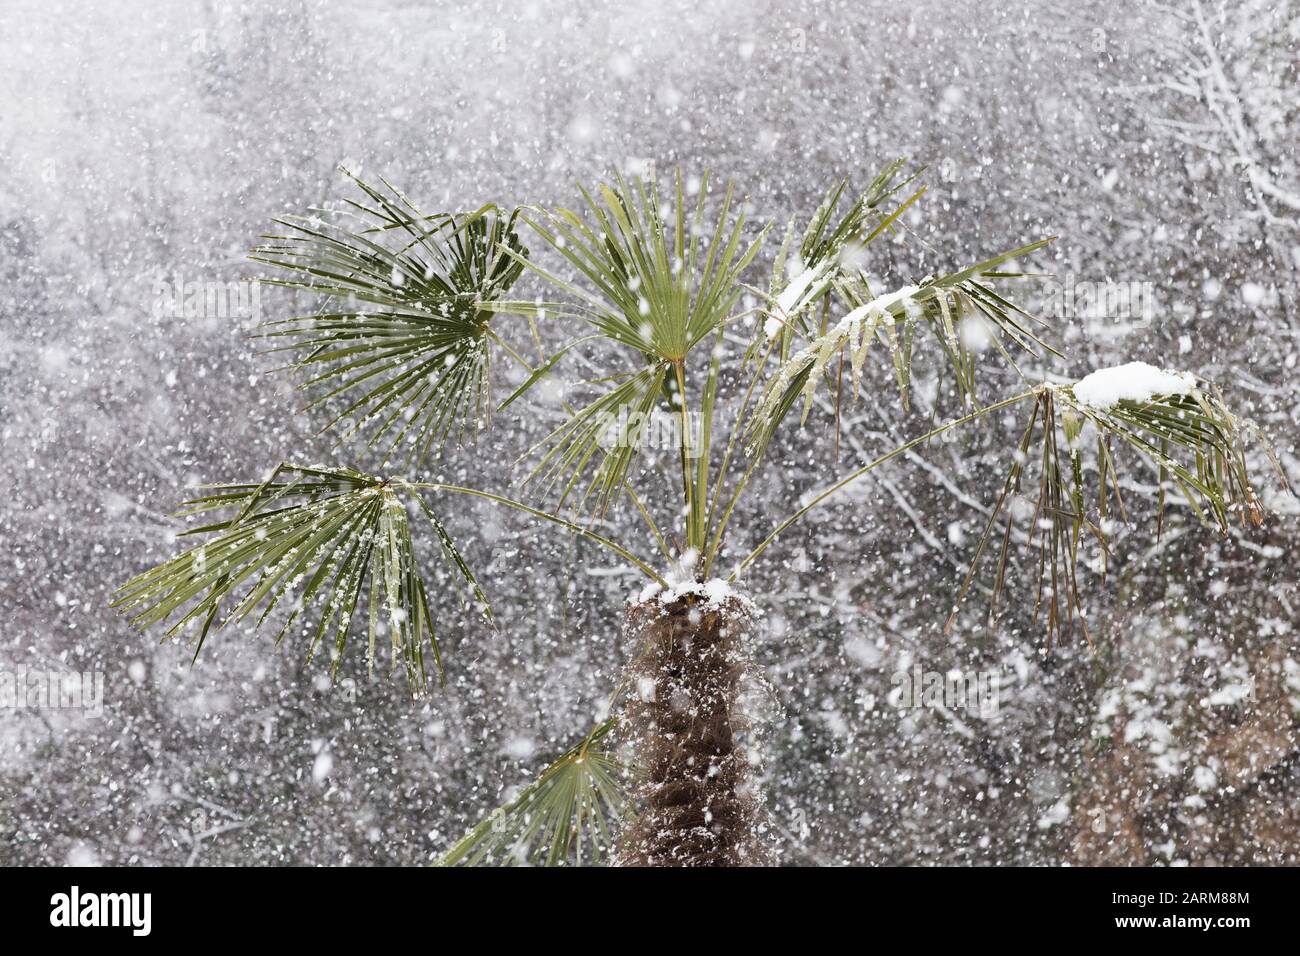 Palm trees covered with straw protectors to keep warm during winter Stock  Photo - Alamy